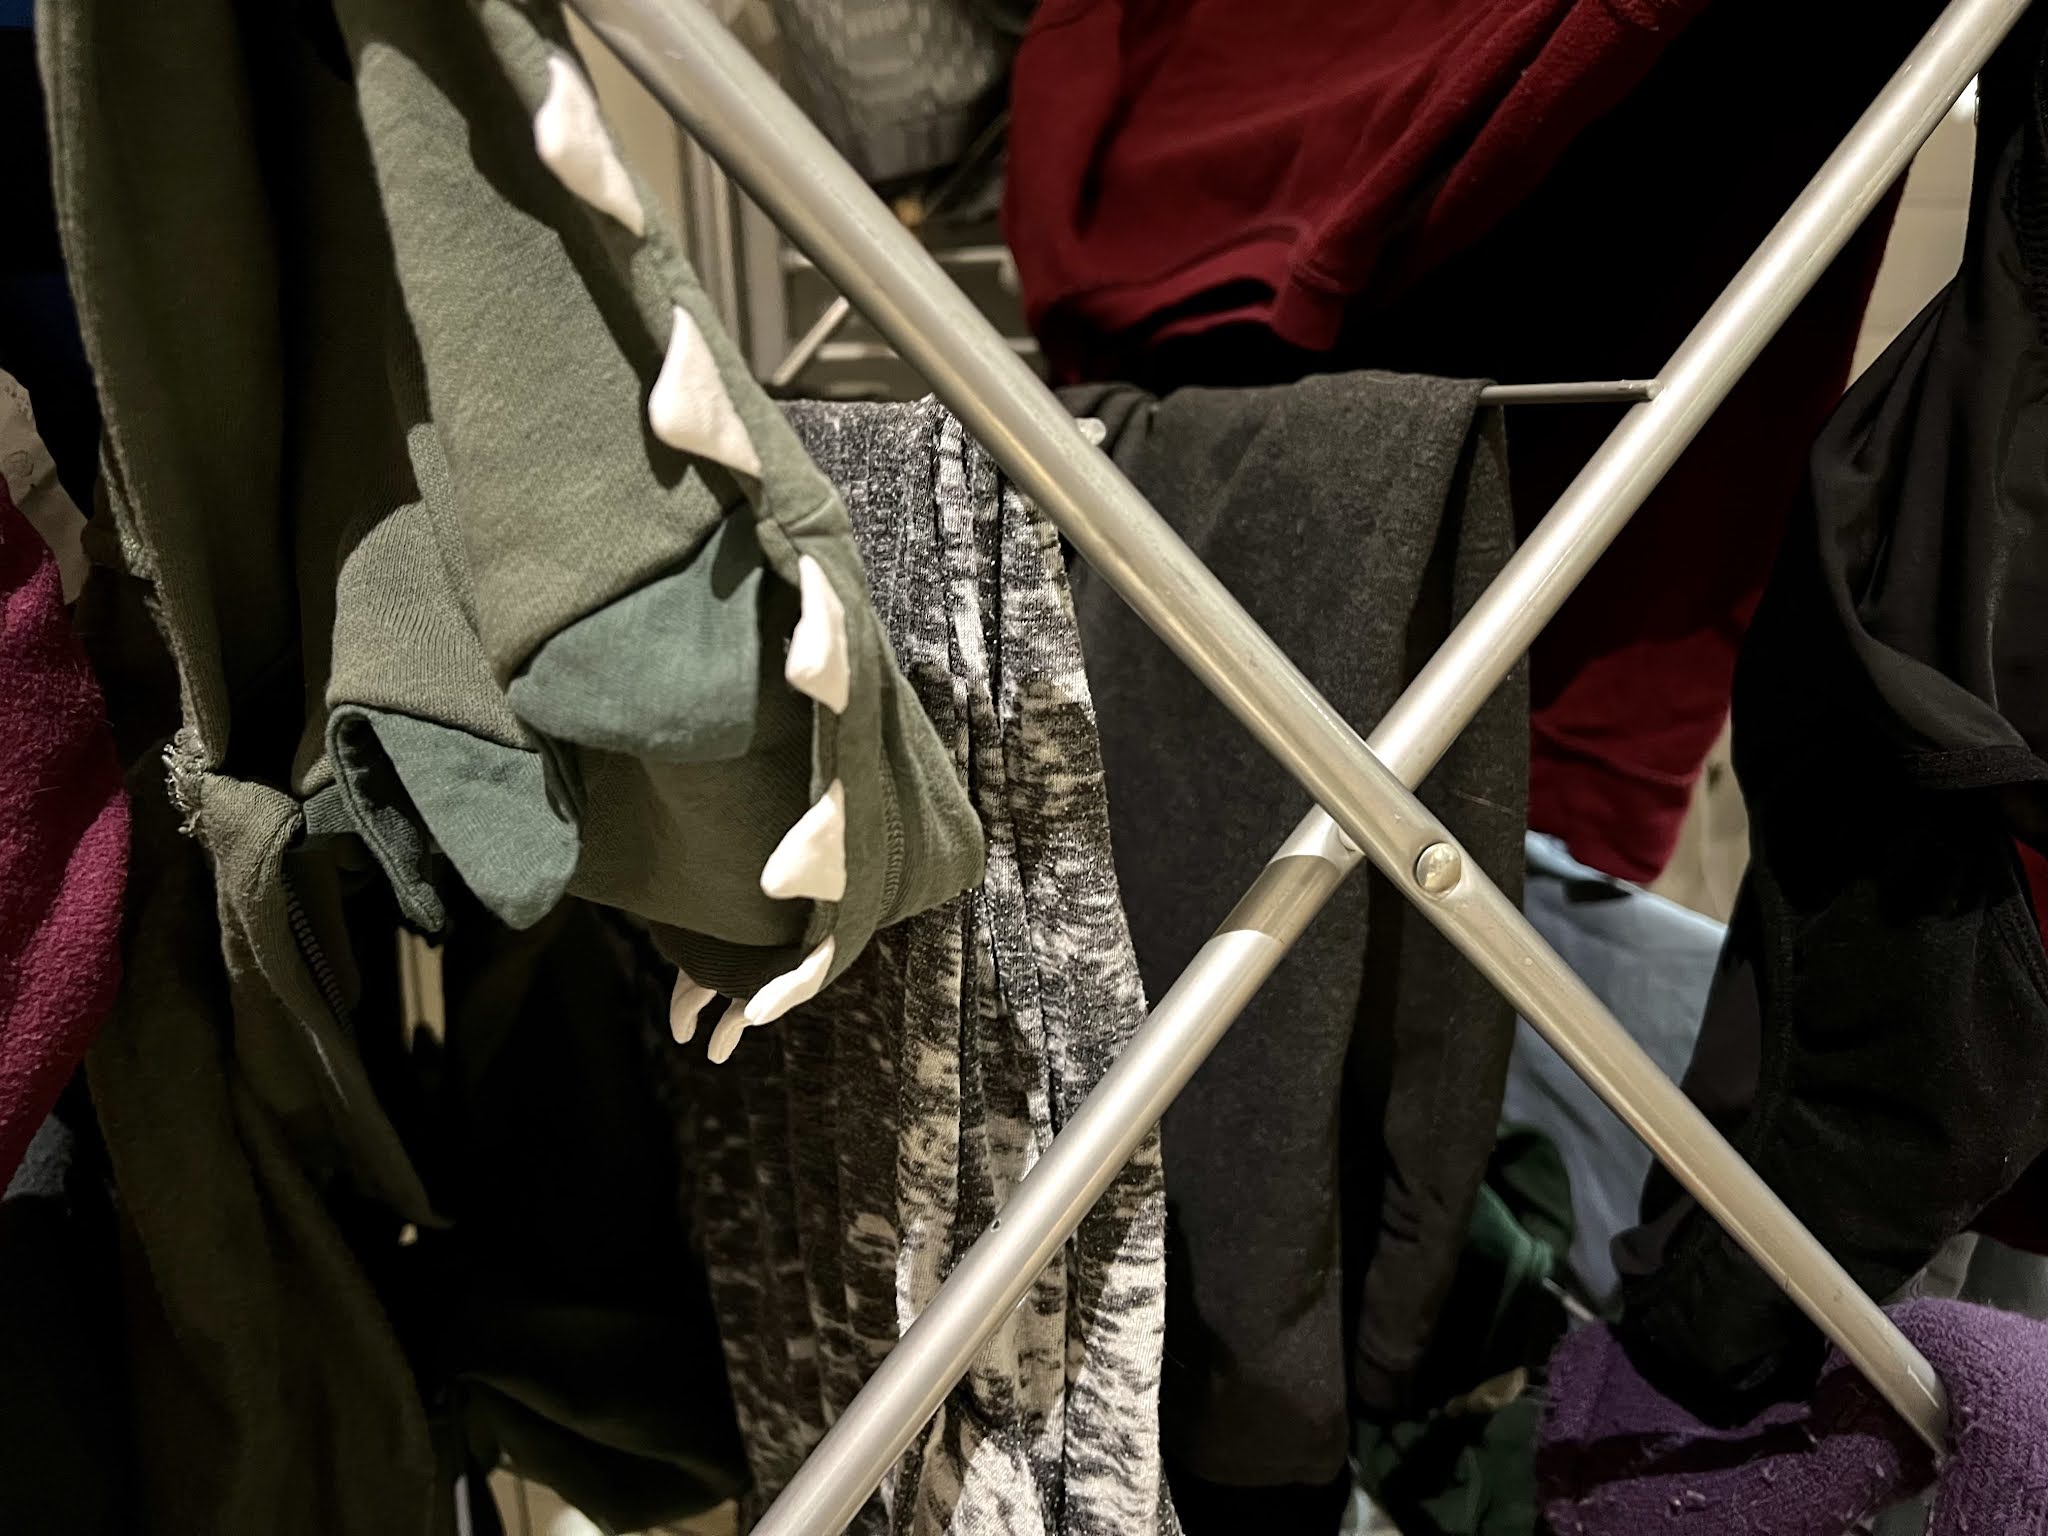 Clothes drying on an airer as quickly as possible